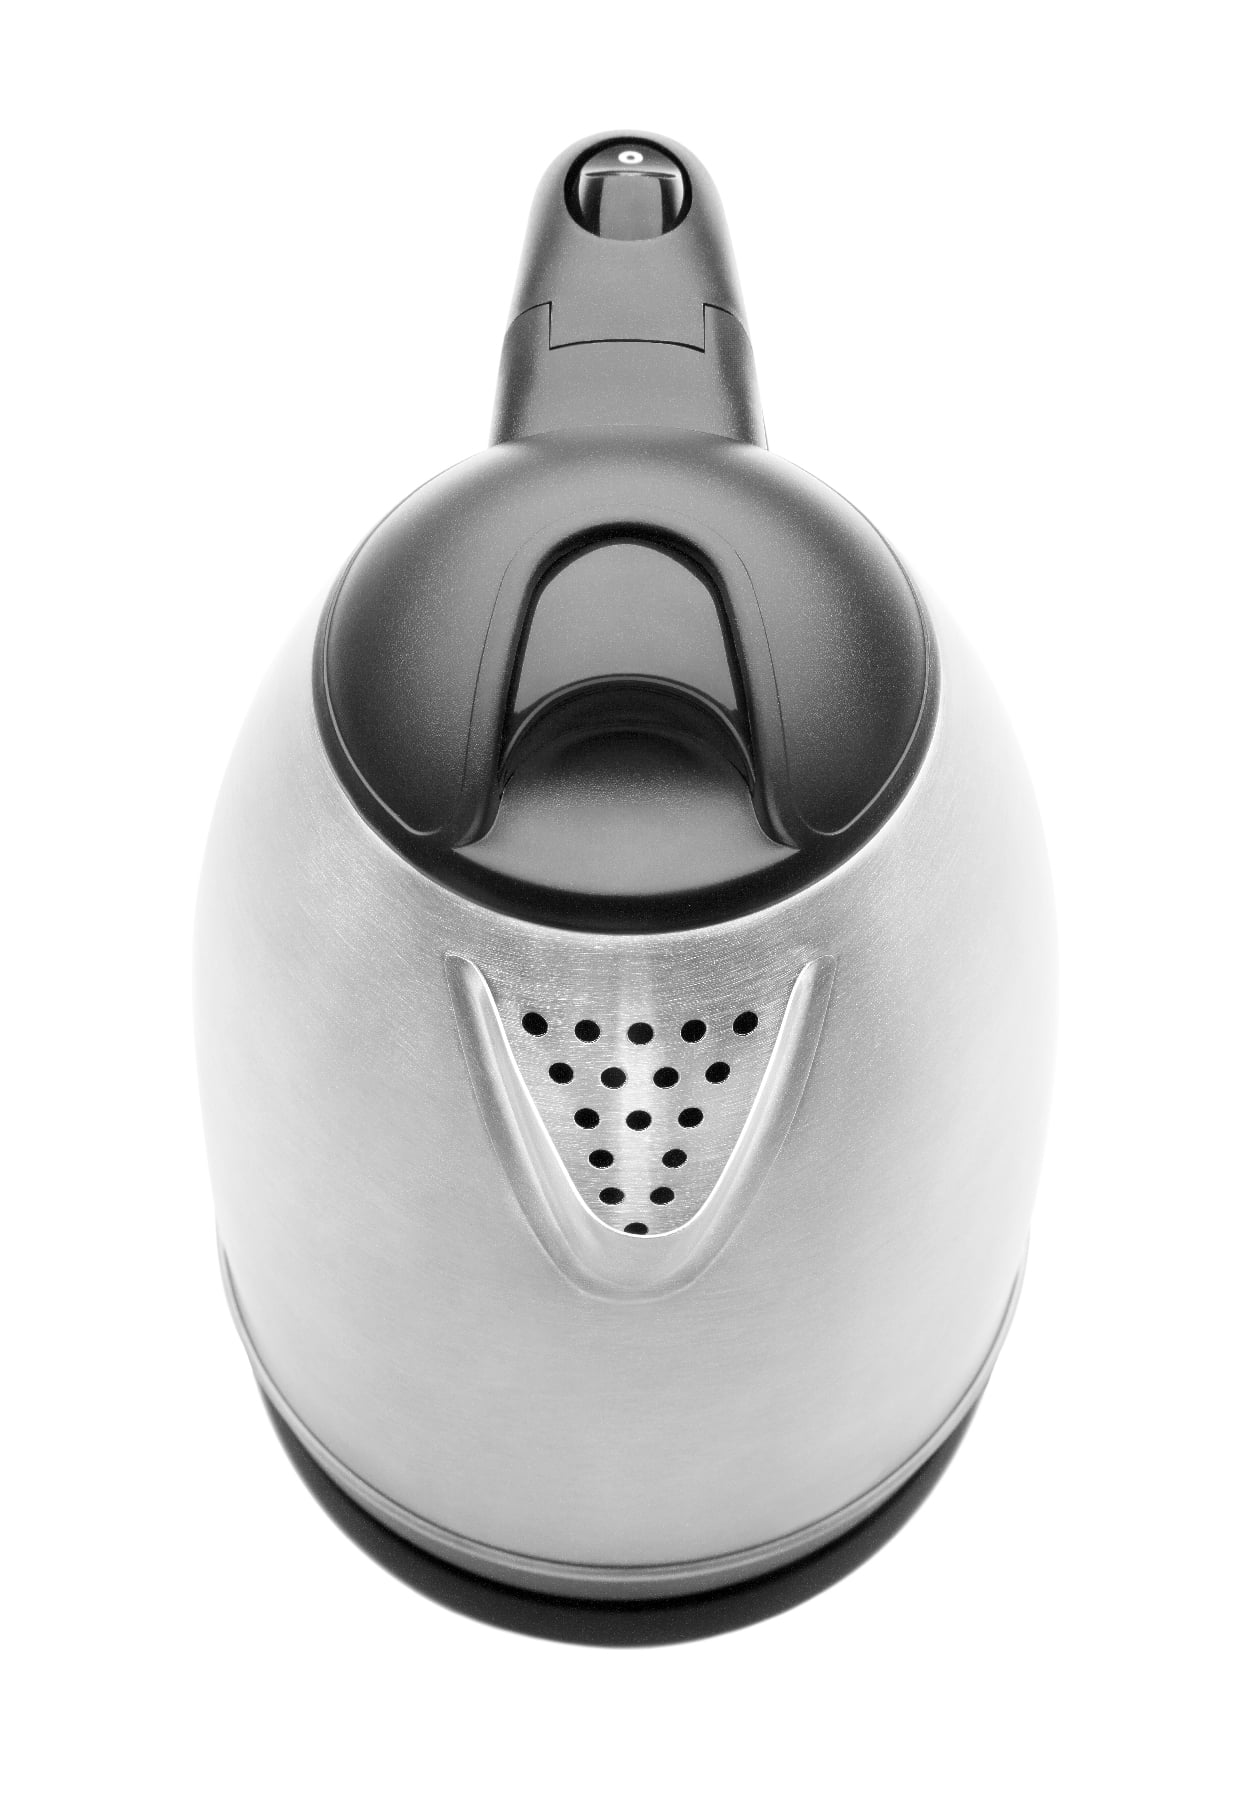 Chefman Stainless Steel Electric Kettle RJ11-18-TI-KW, Color: Stainless  Steel - JCPenney